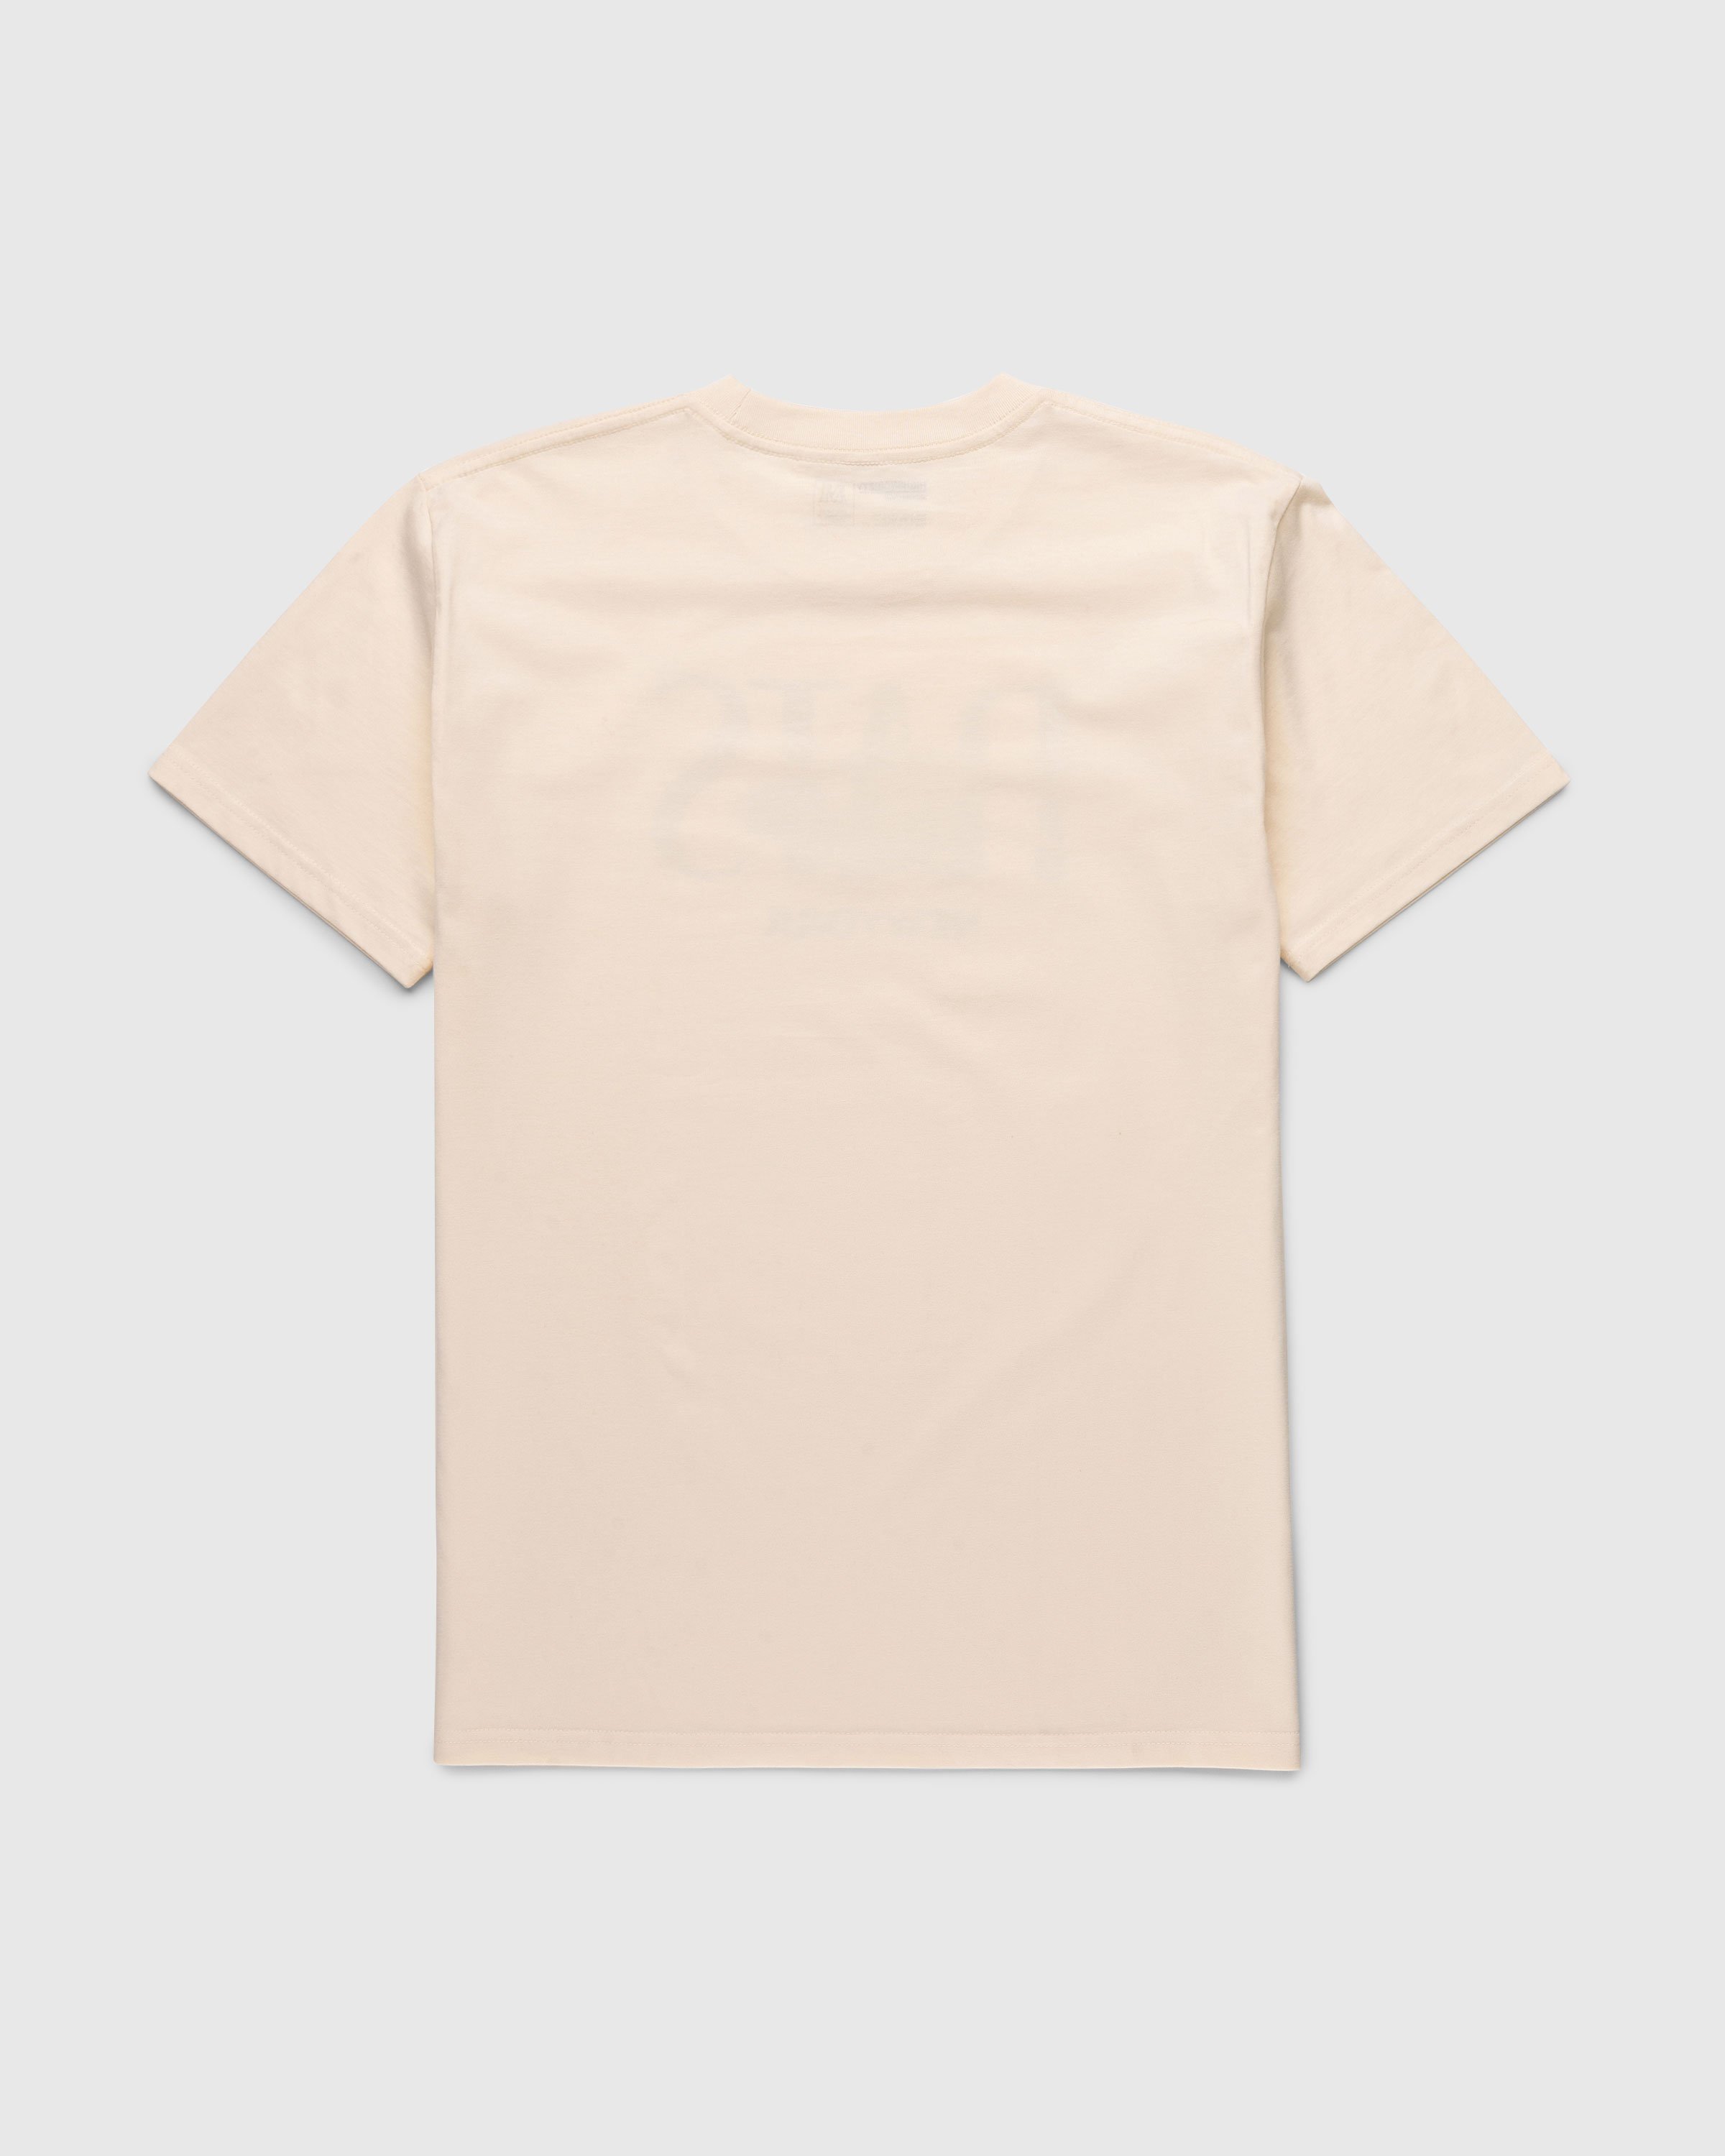 At The Moment x Highsnobiety - New York Rats T-Shirt - Clothing - Beige - Image 2